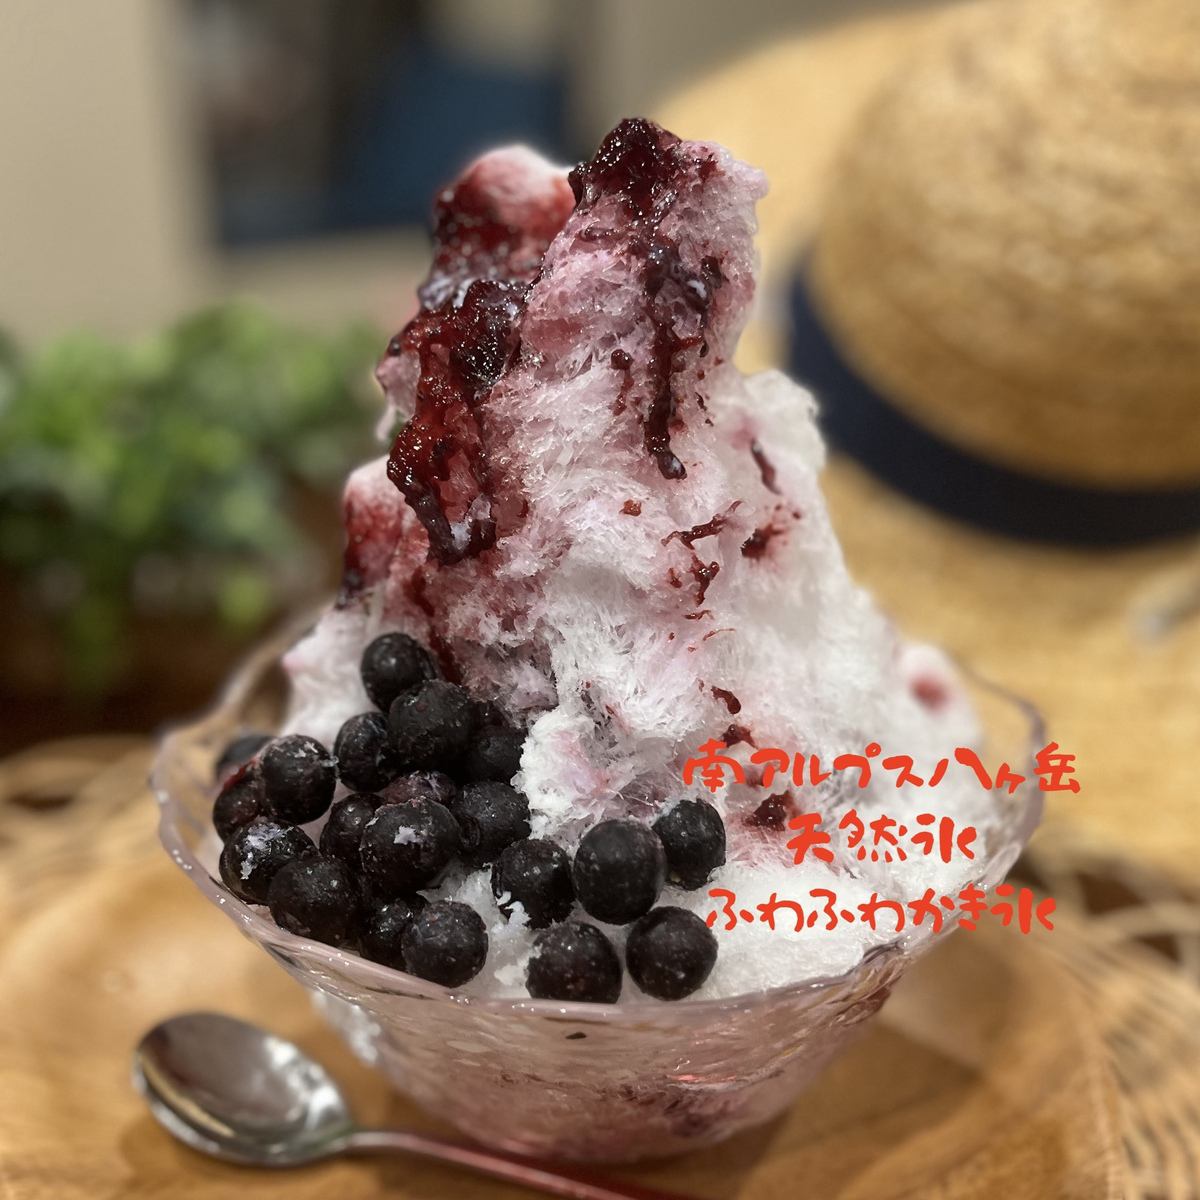 We also offer shaved ice made with natural ice during certain seasons.The natural ice we use is sourced from Yagi, a brewer in the Yatsugatake area of Minami-Alpur.